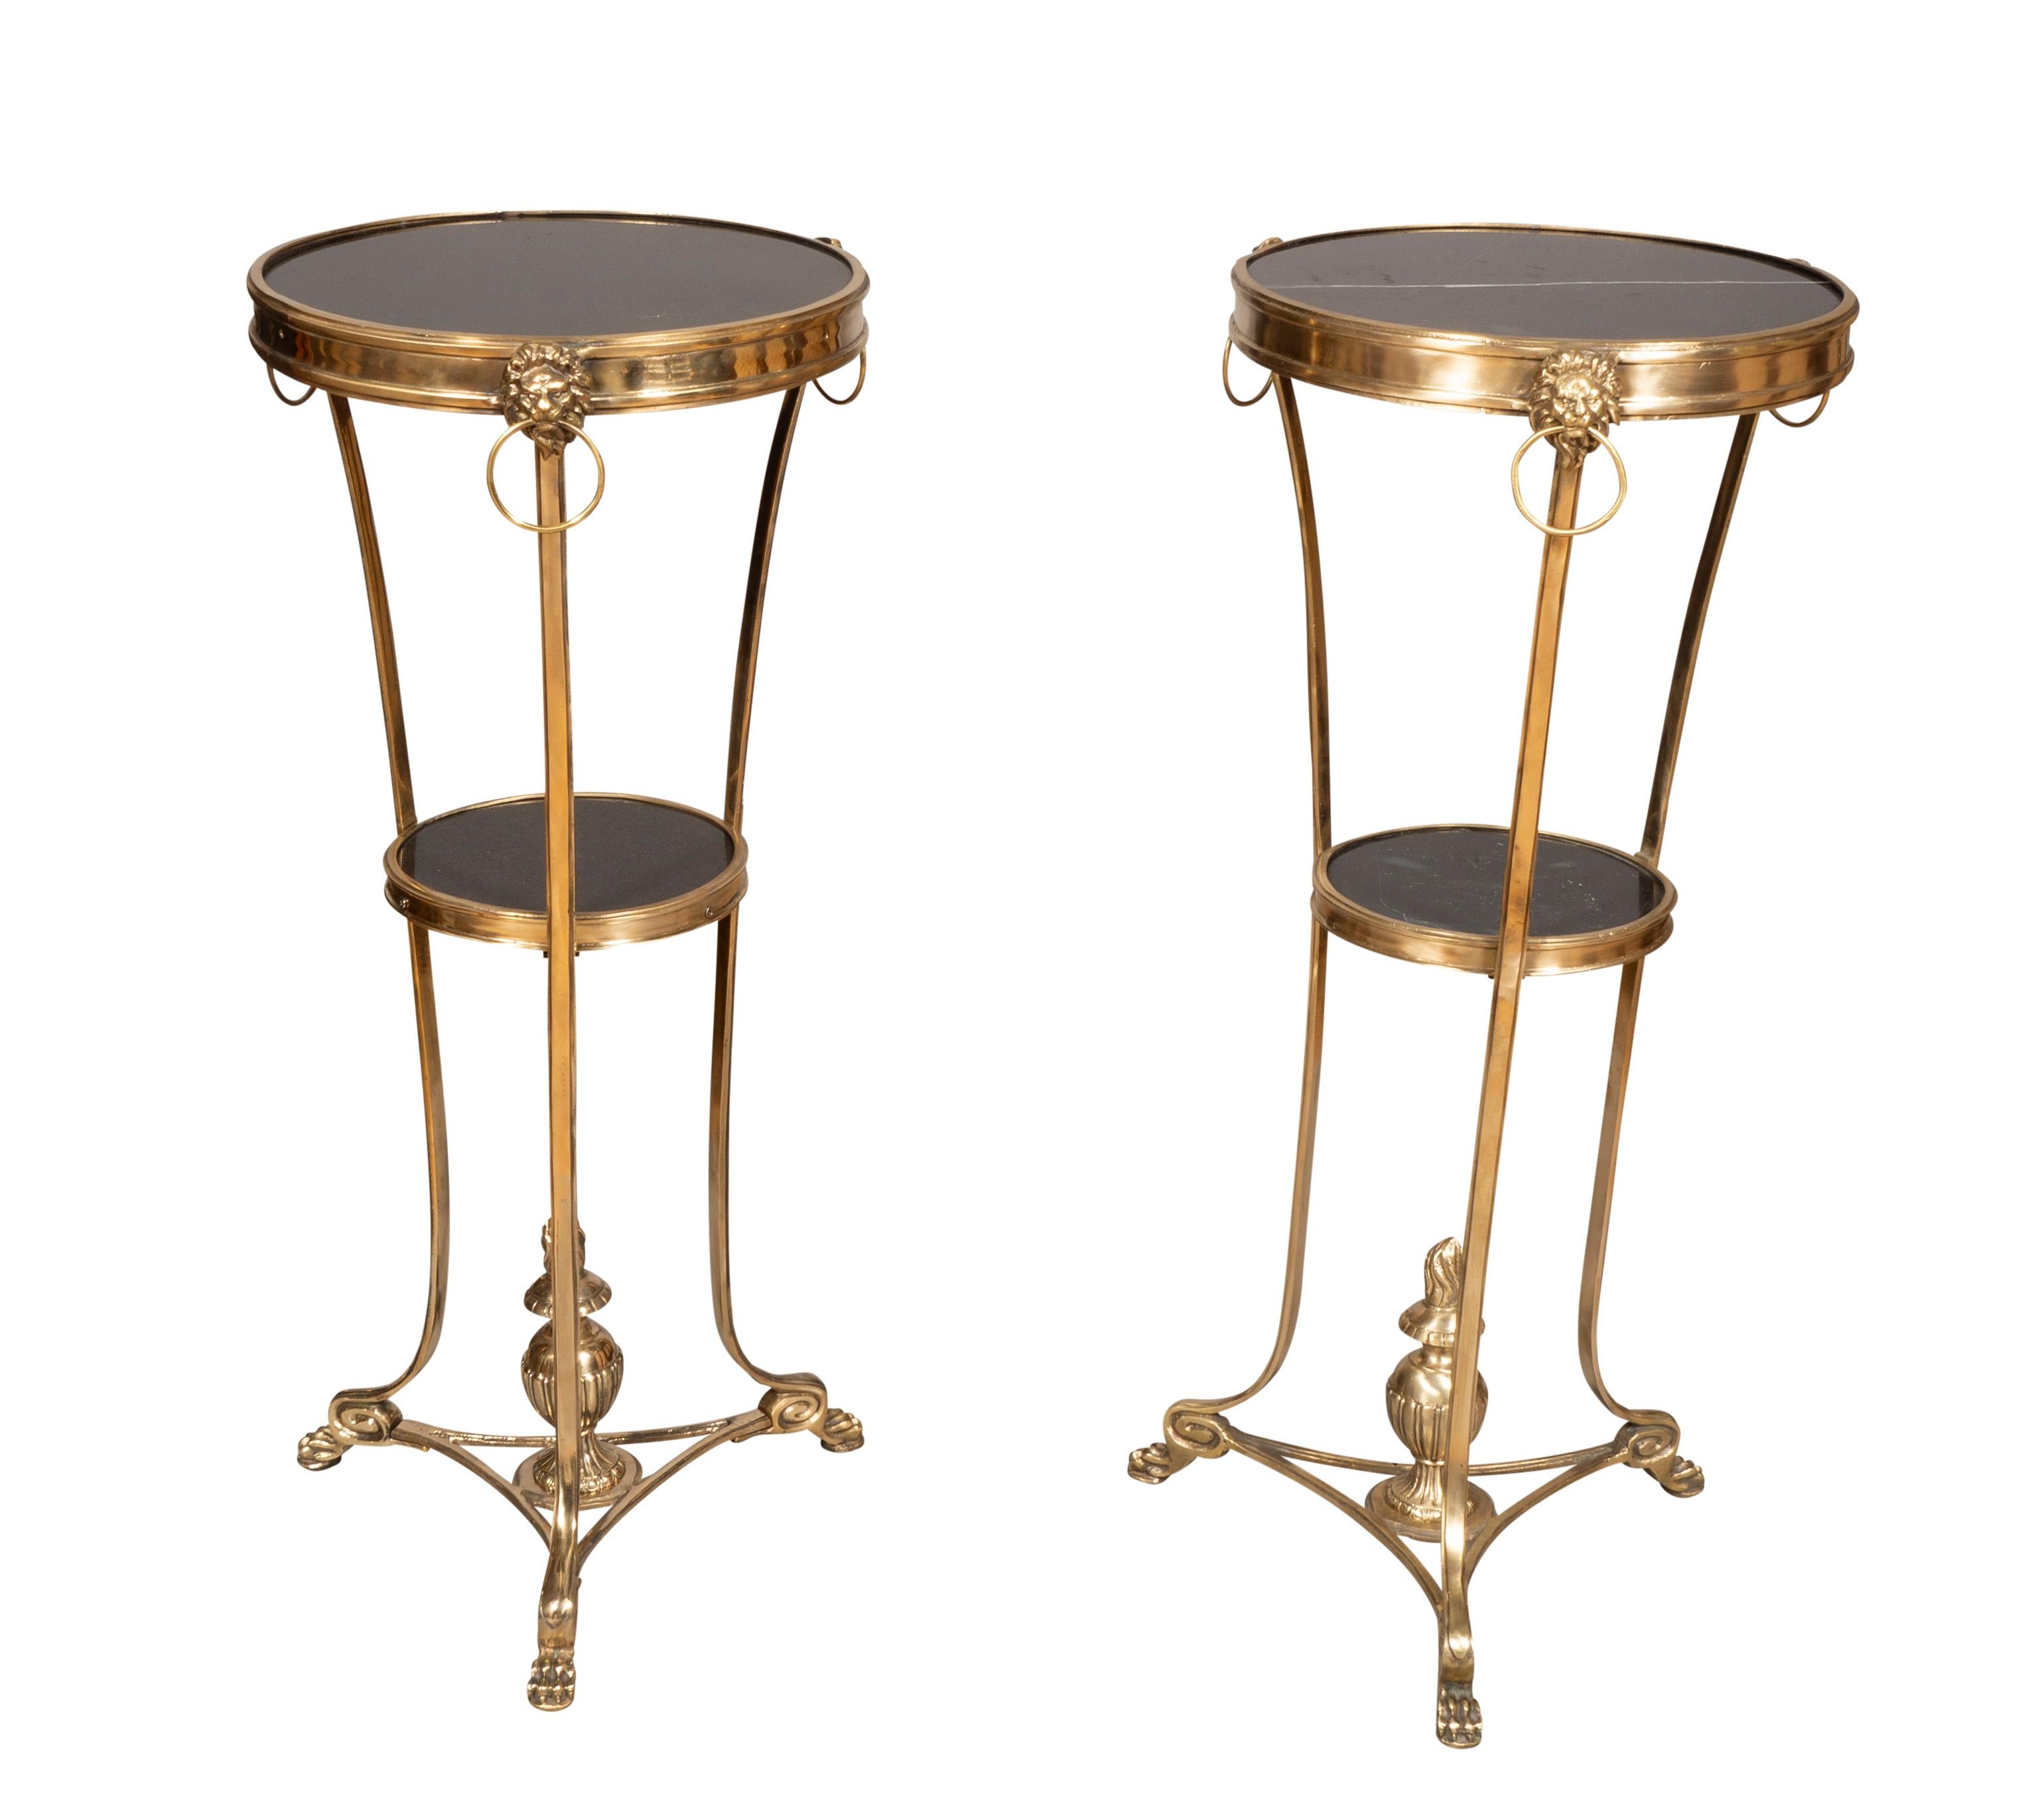 Each with a circular top with black marble insert with a brass border with lions head rings. Lower conforming shelf. Bottom finial ending on paw feet.